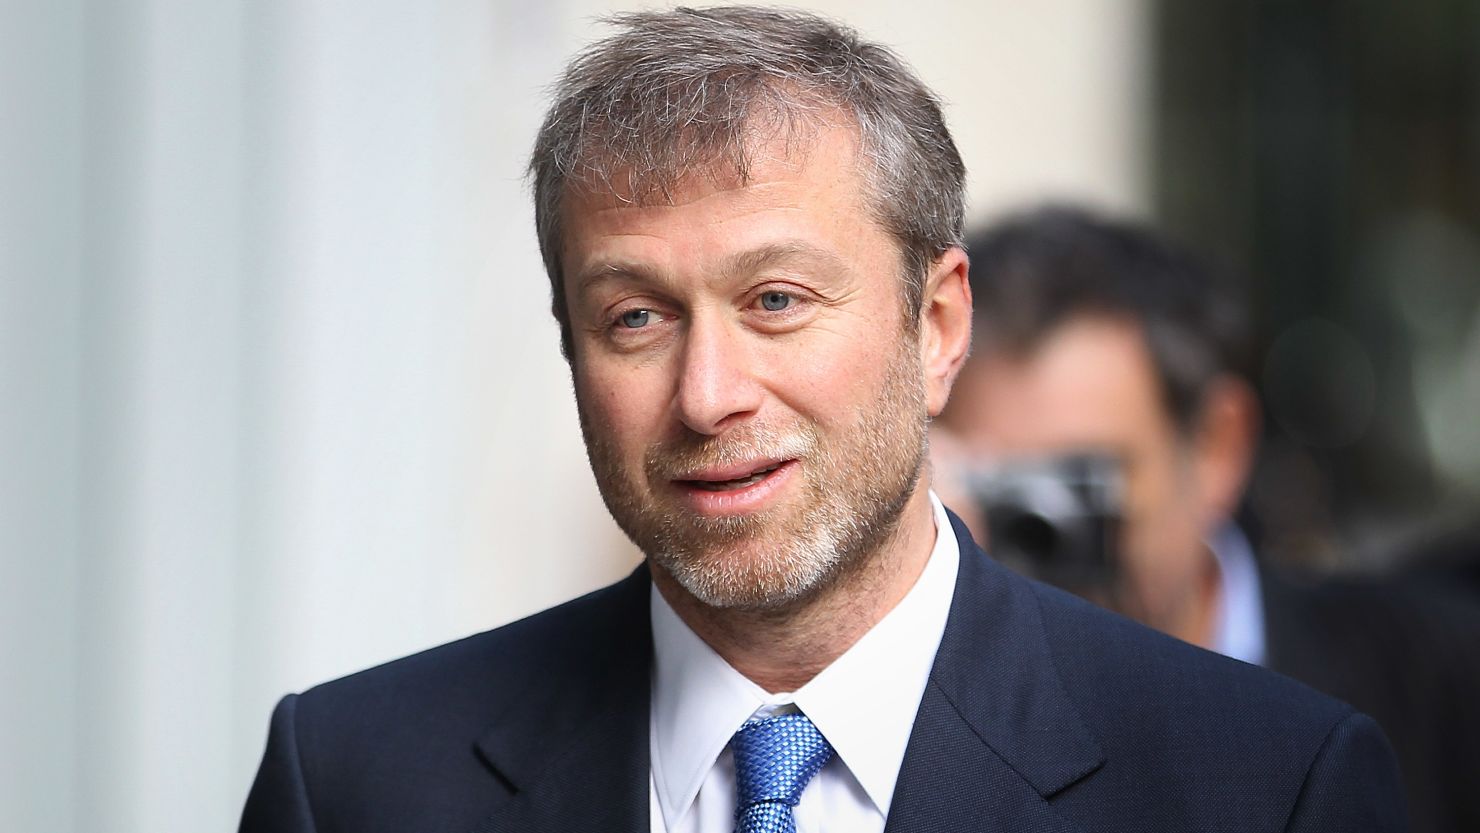 Abramovich has poured millions into Chelsea but has faced delays in renewing his UK visa. 